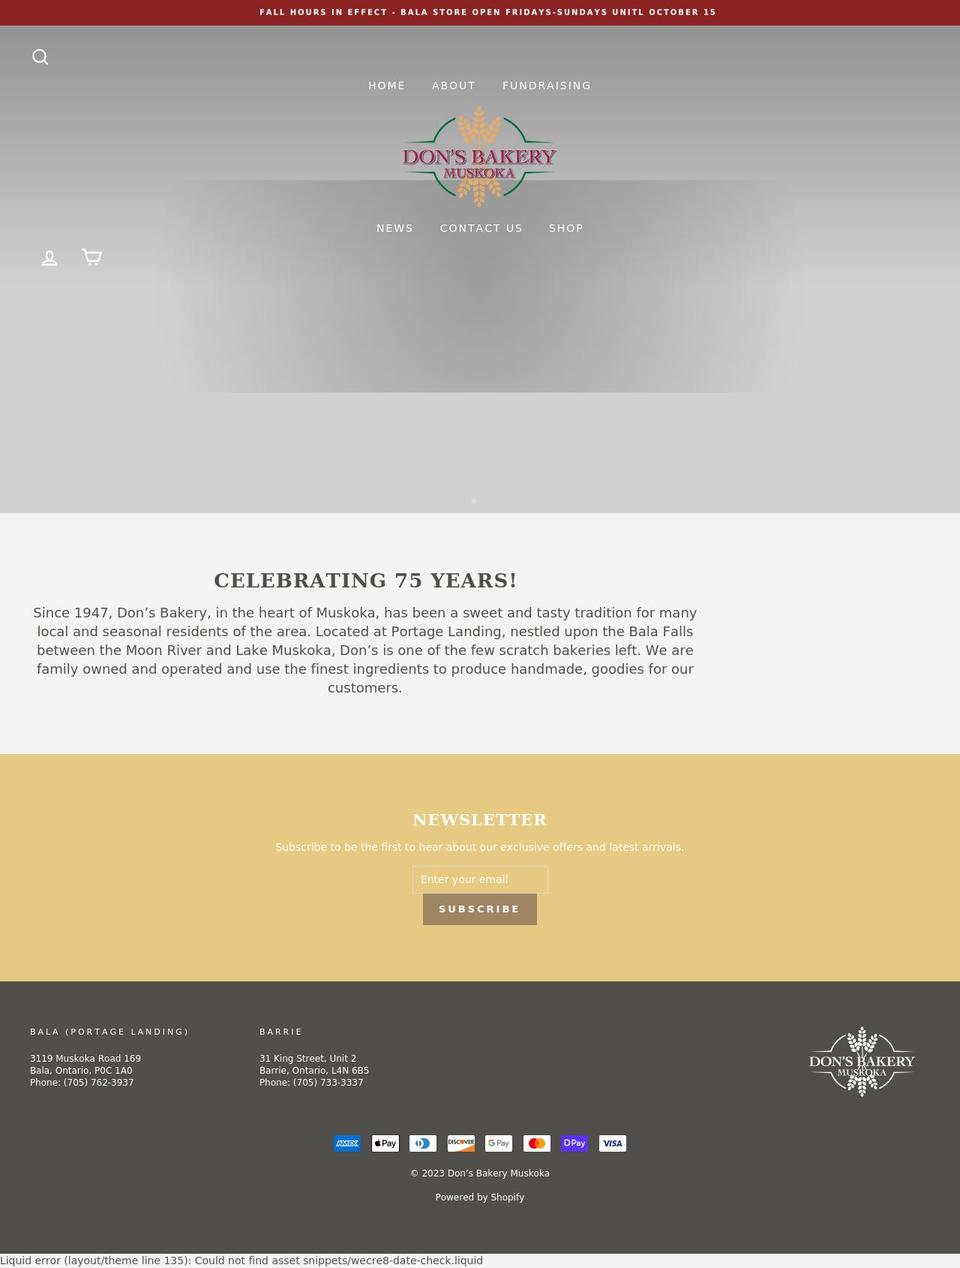 Bakery Shopify theme site example donsbakery.ca